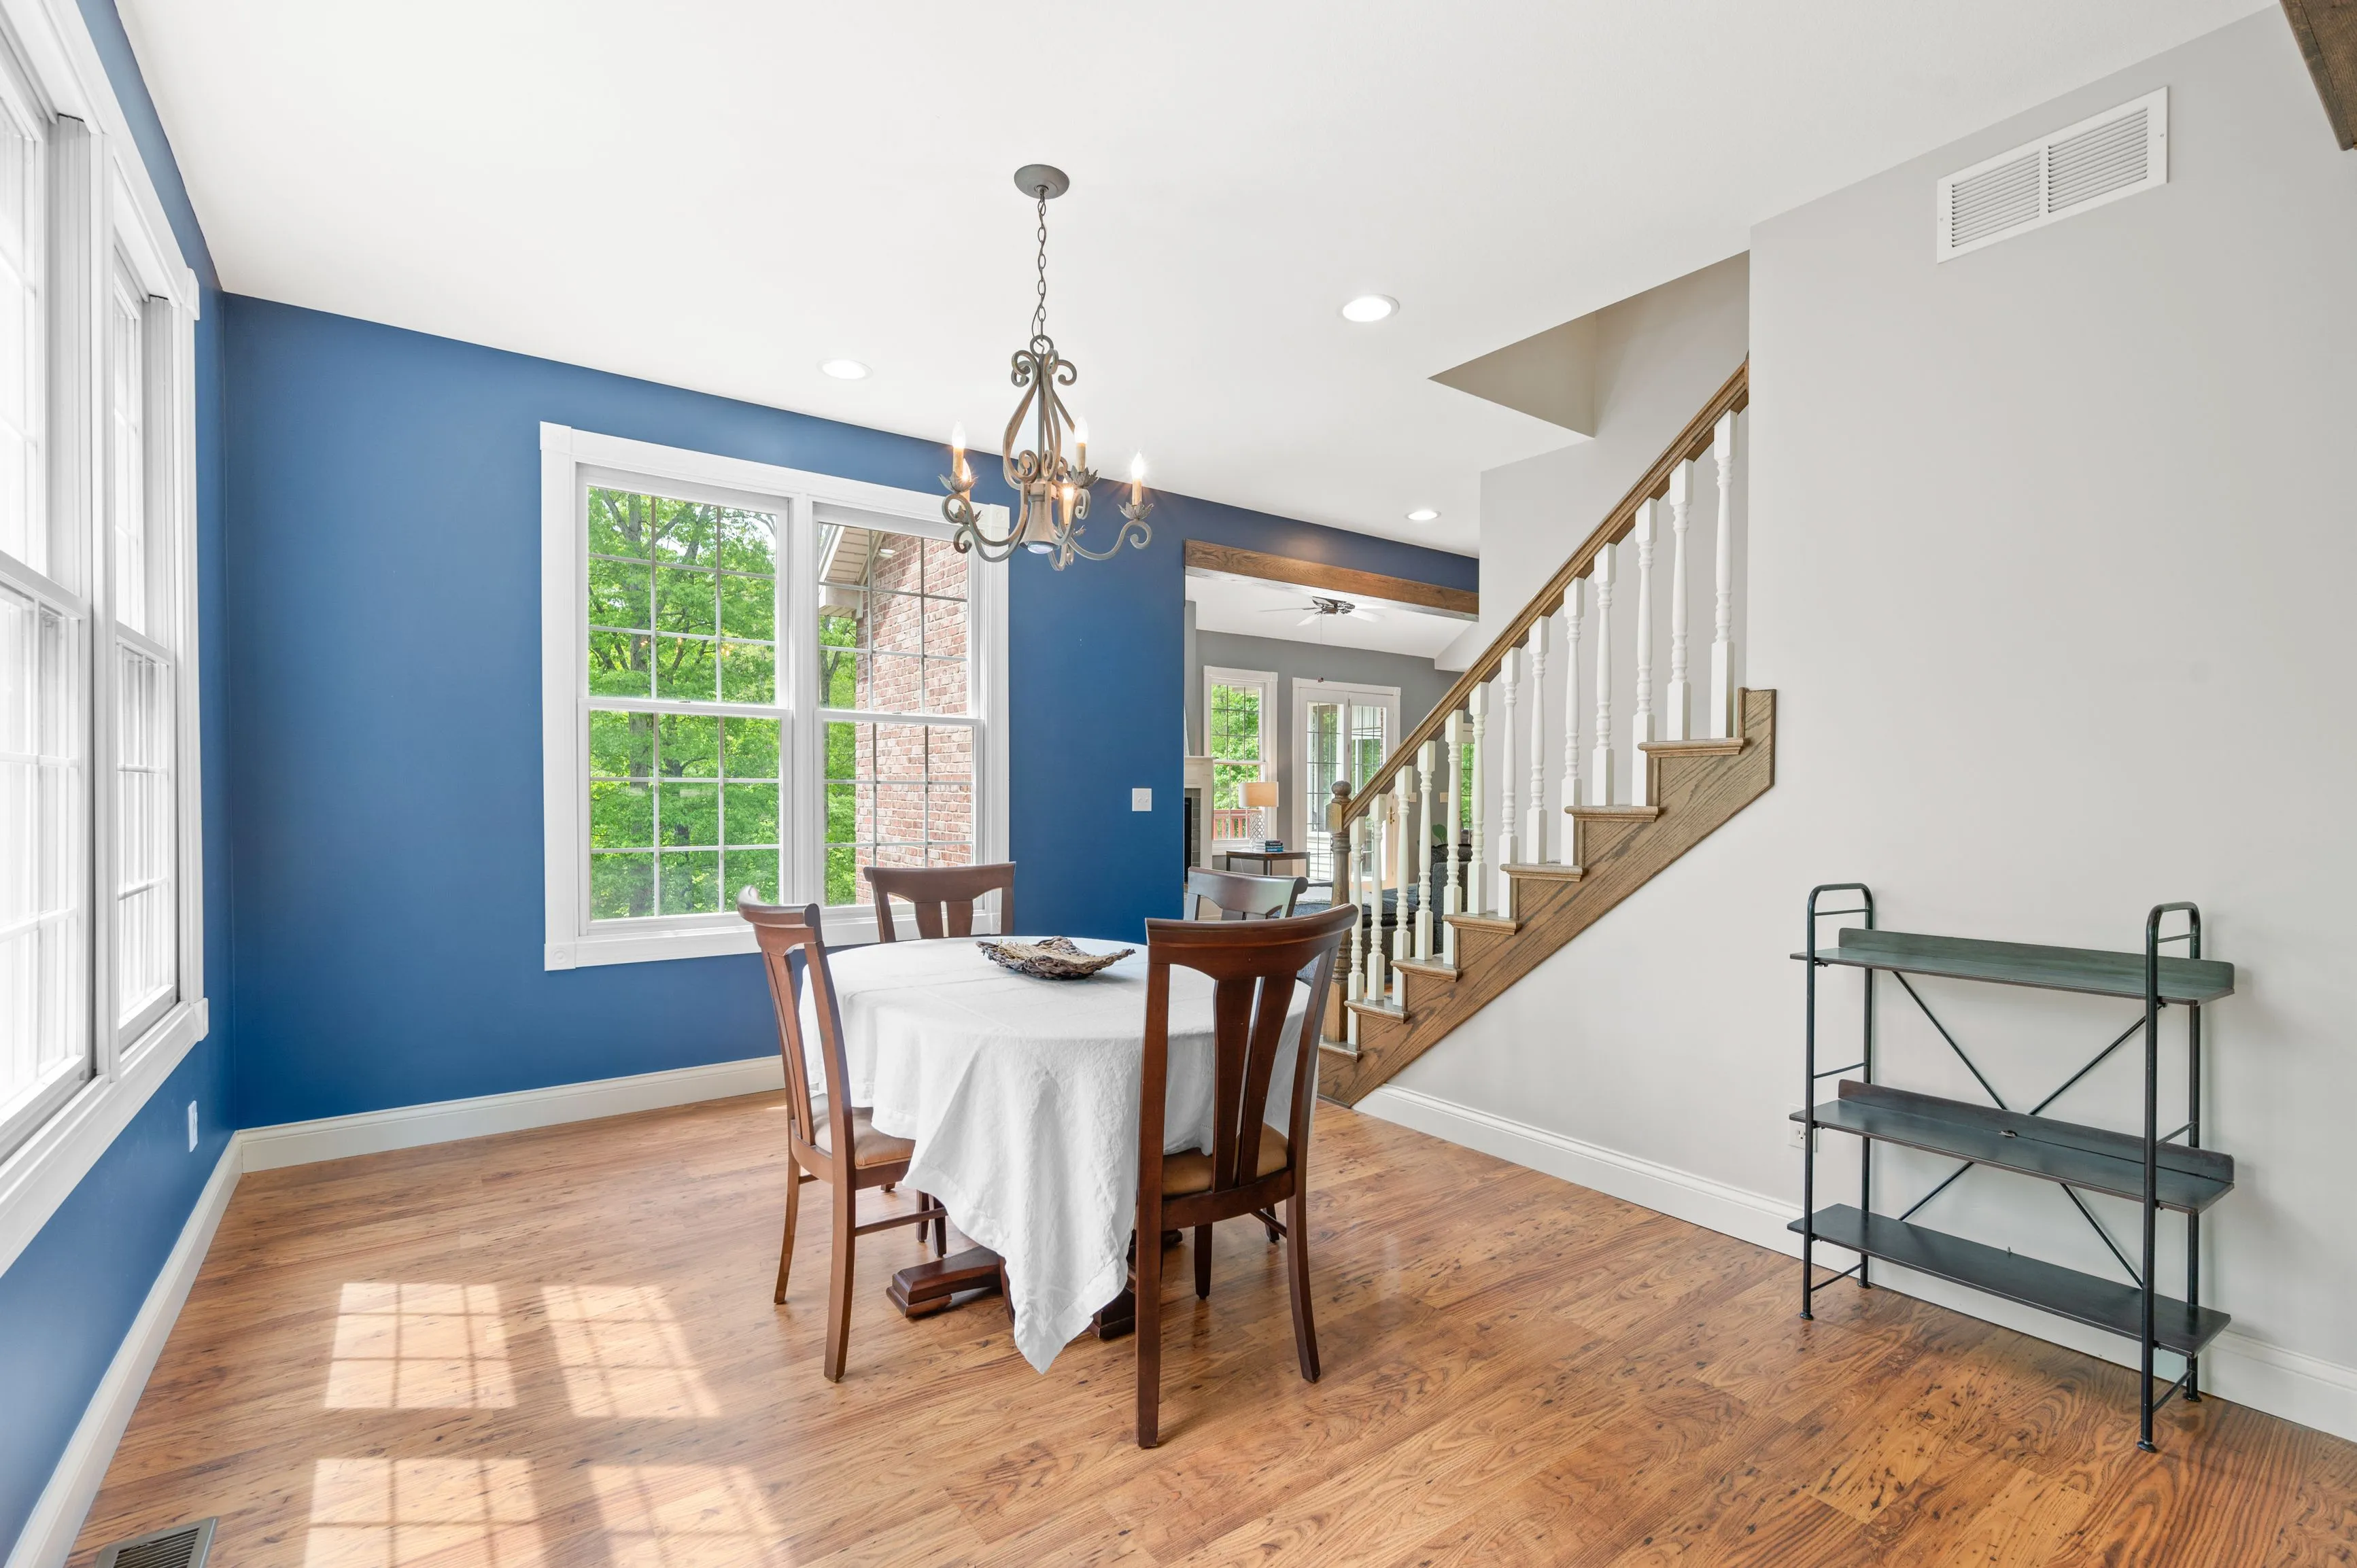 Bright dining room with blue walls, a wooden table set for four, hardwood floors, a classic chandelier, and a staircase leading to the upper level.